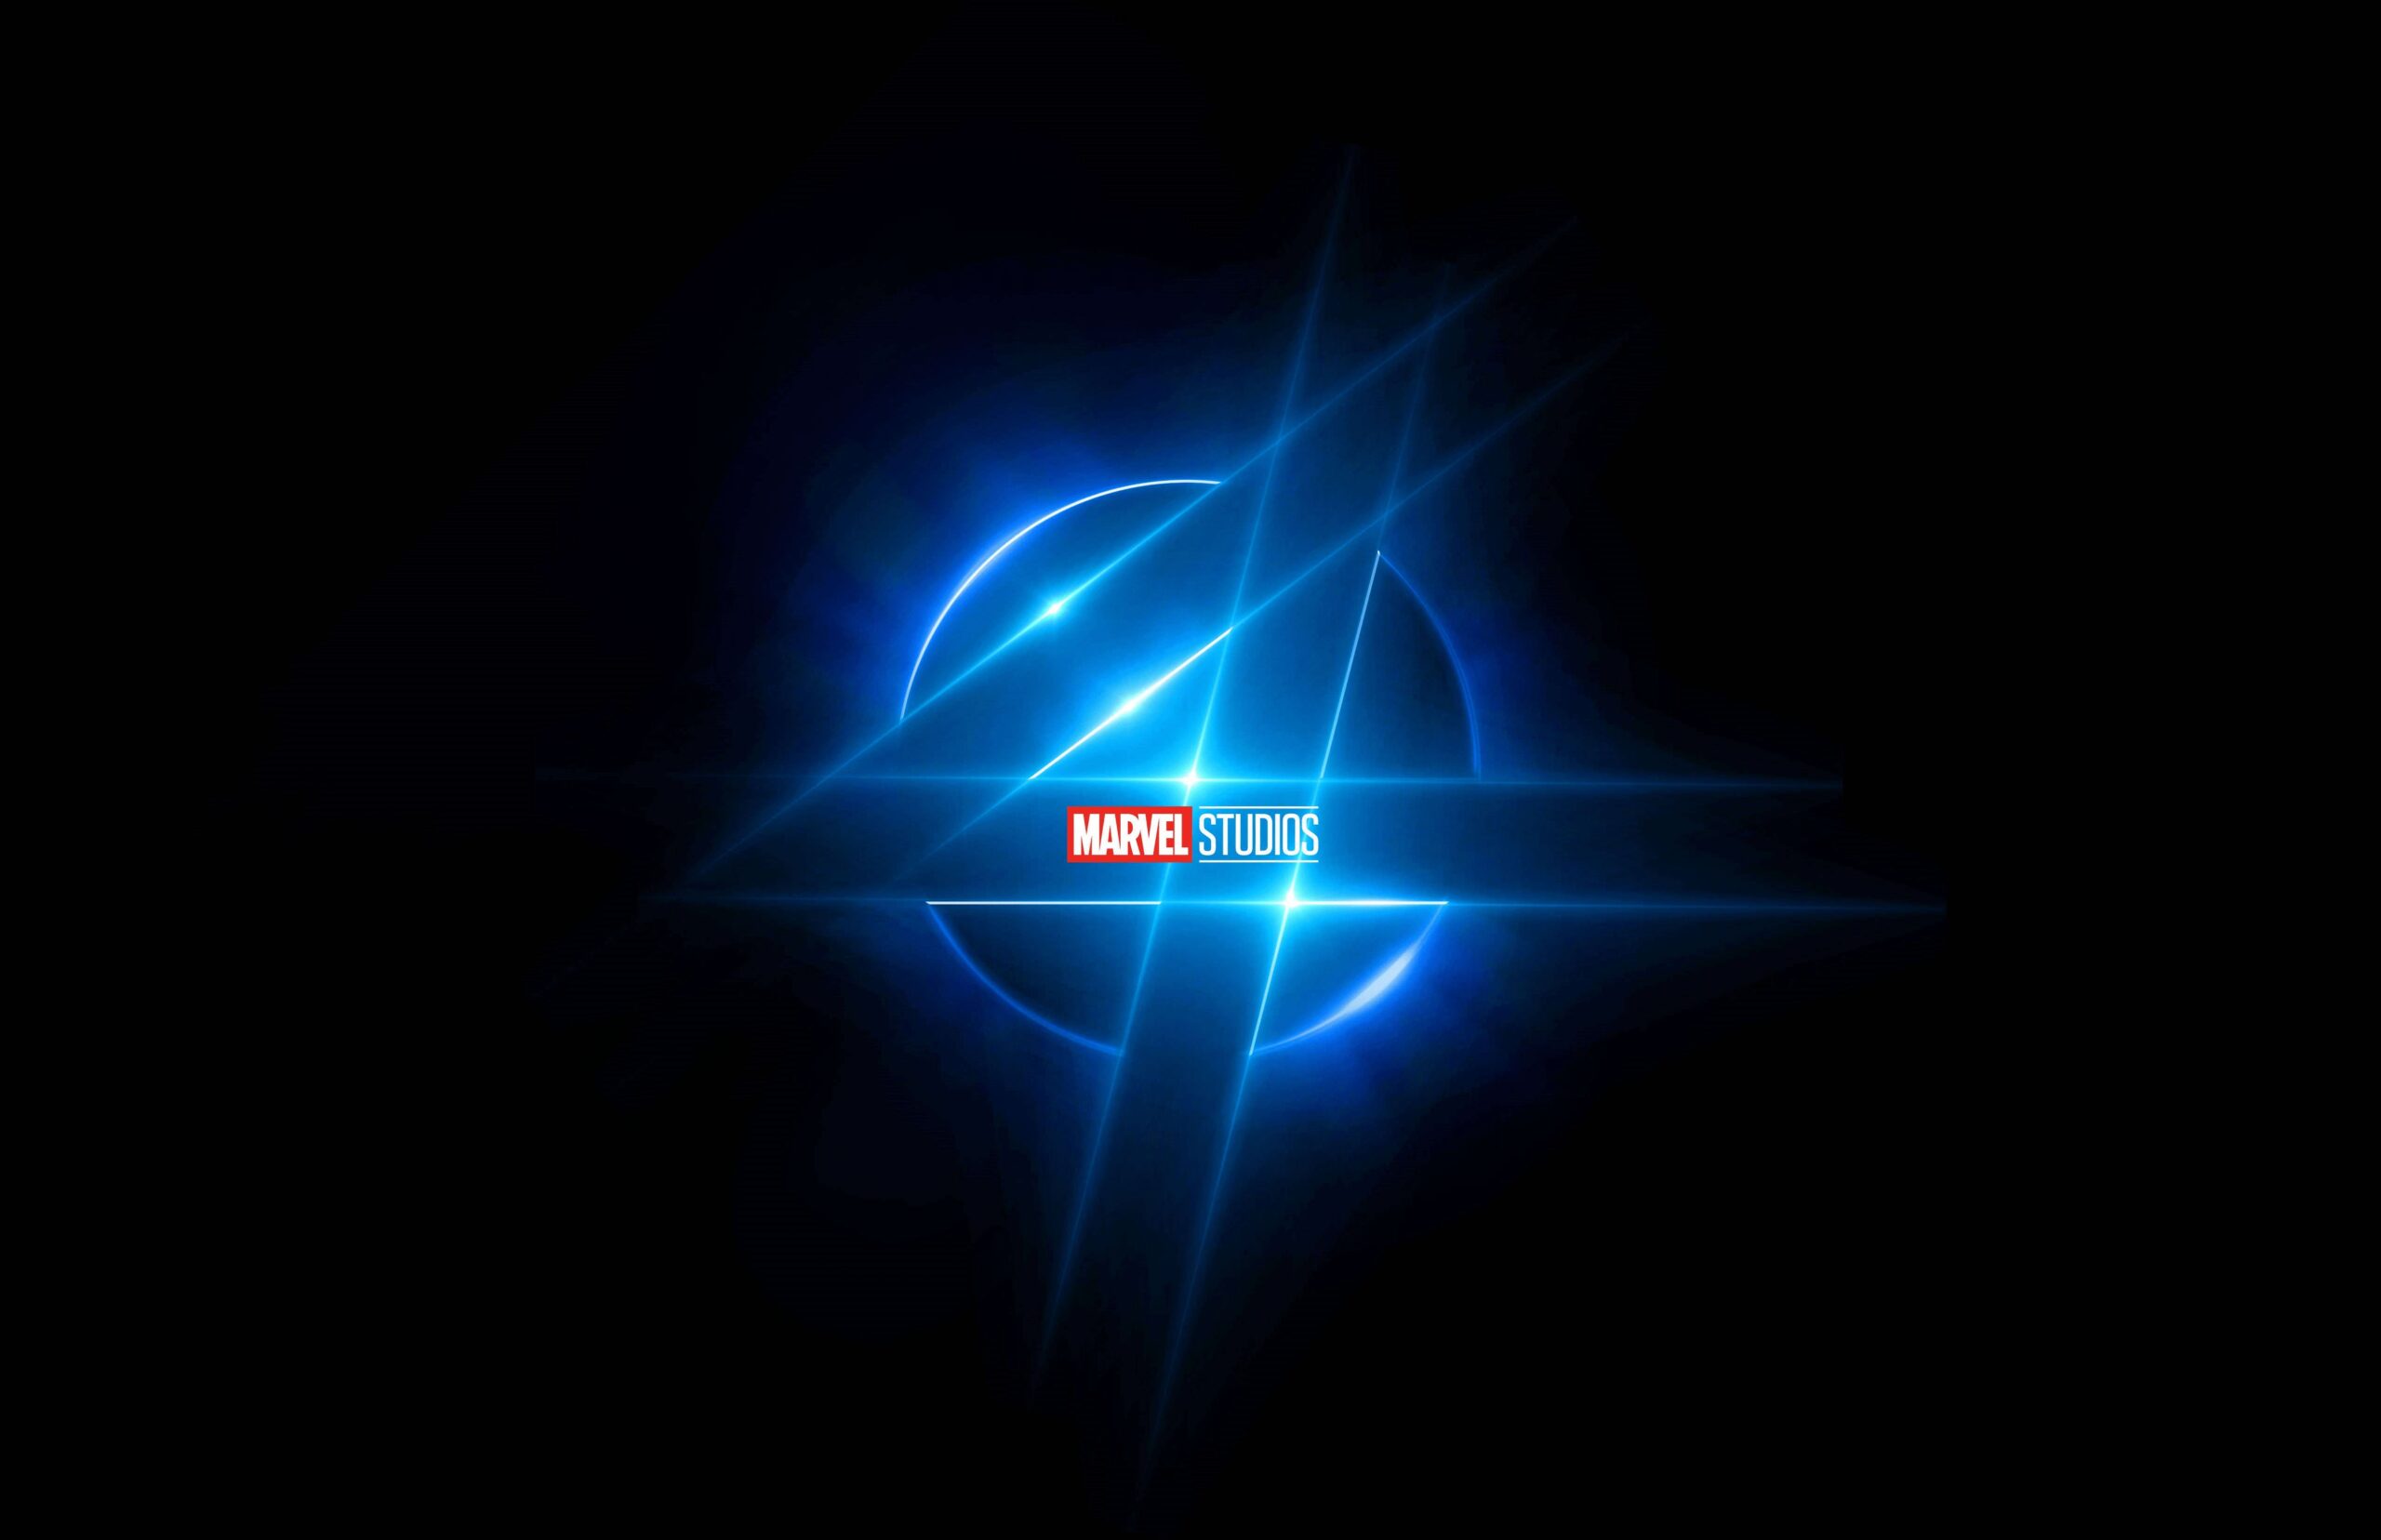 Marvel Cinematic Universe Upcoming Releases 2023-2025